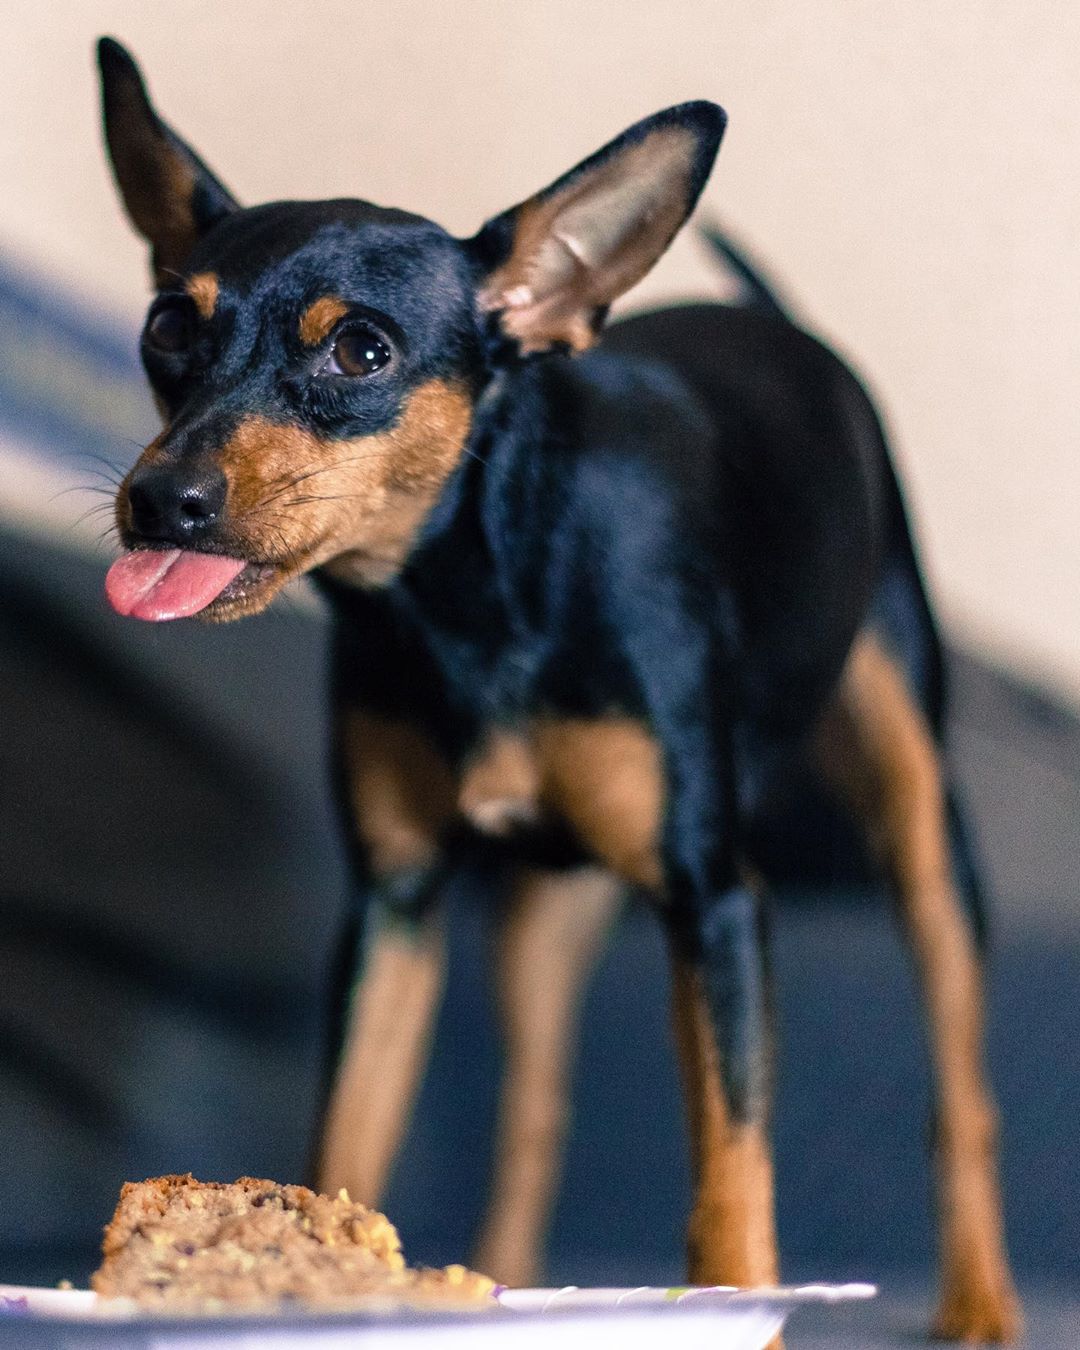 A Miniature Pinscher standing behind its bowl of food on the floor while licking its mouth